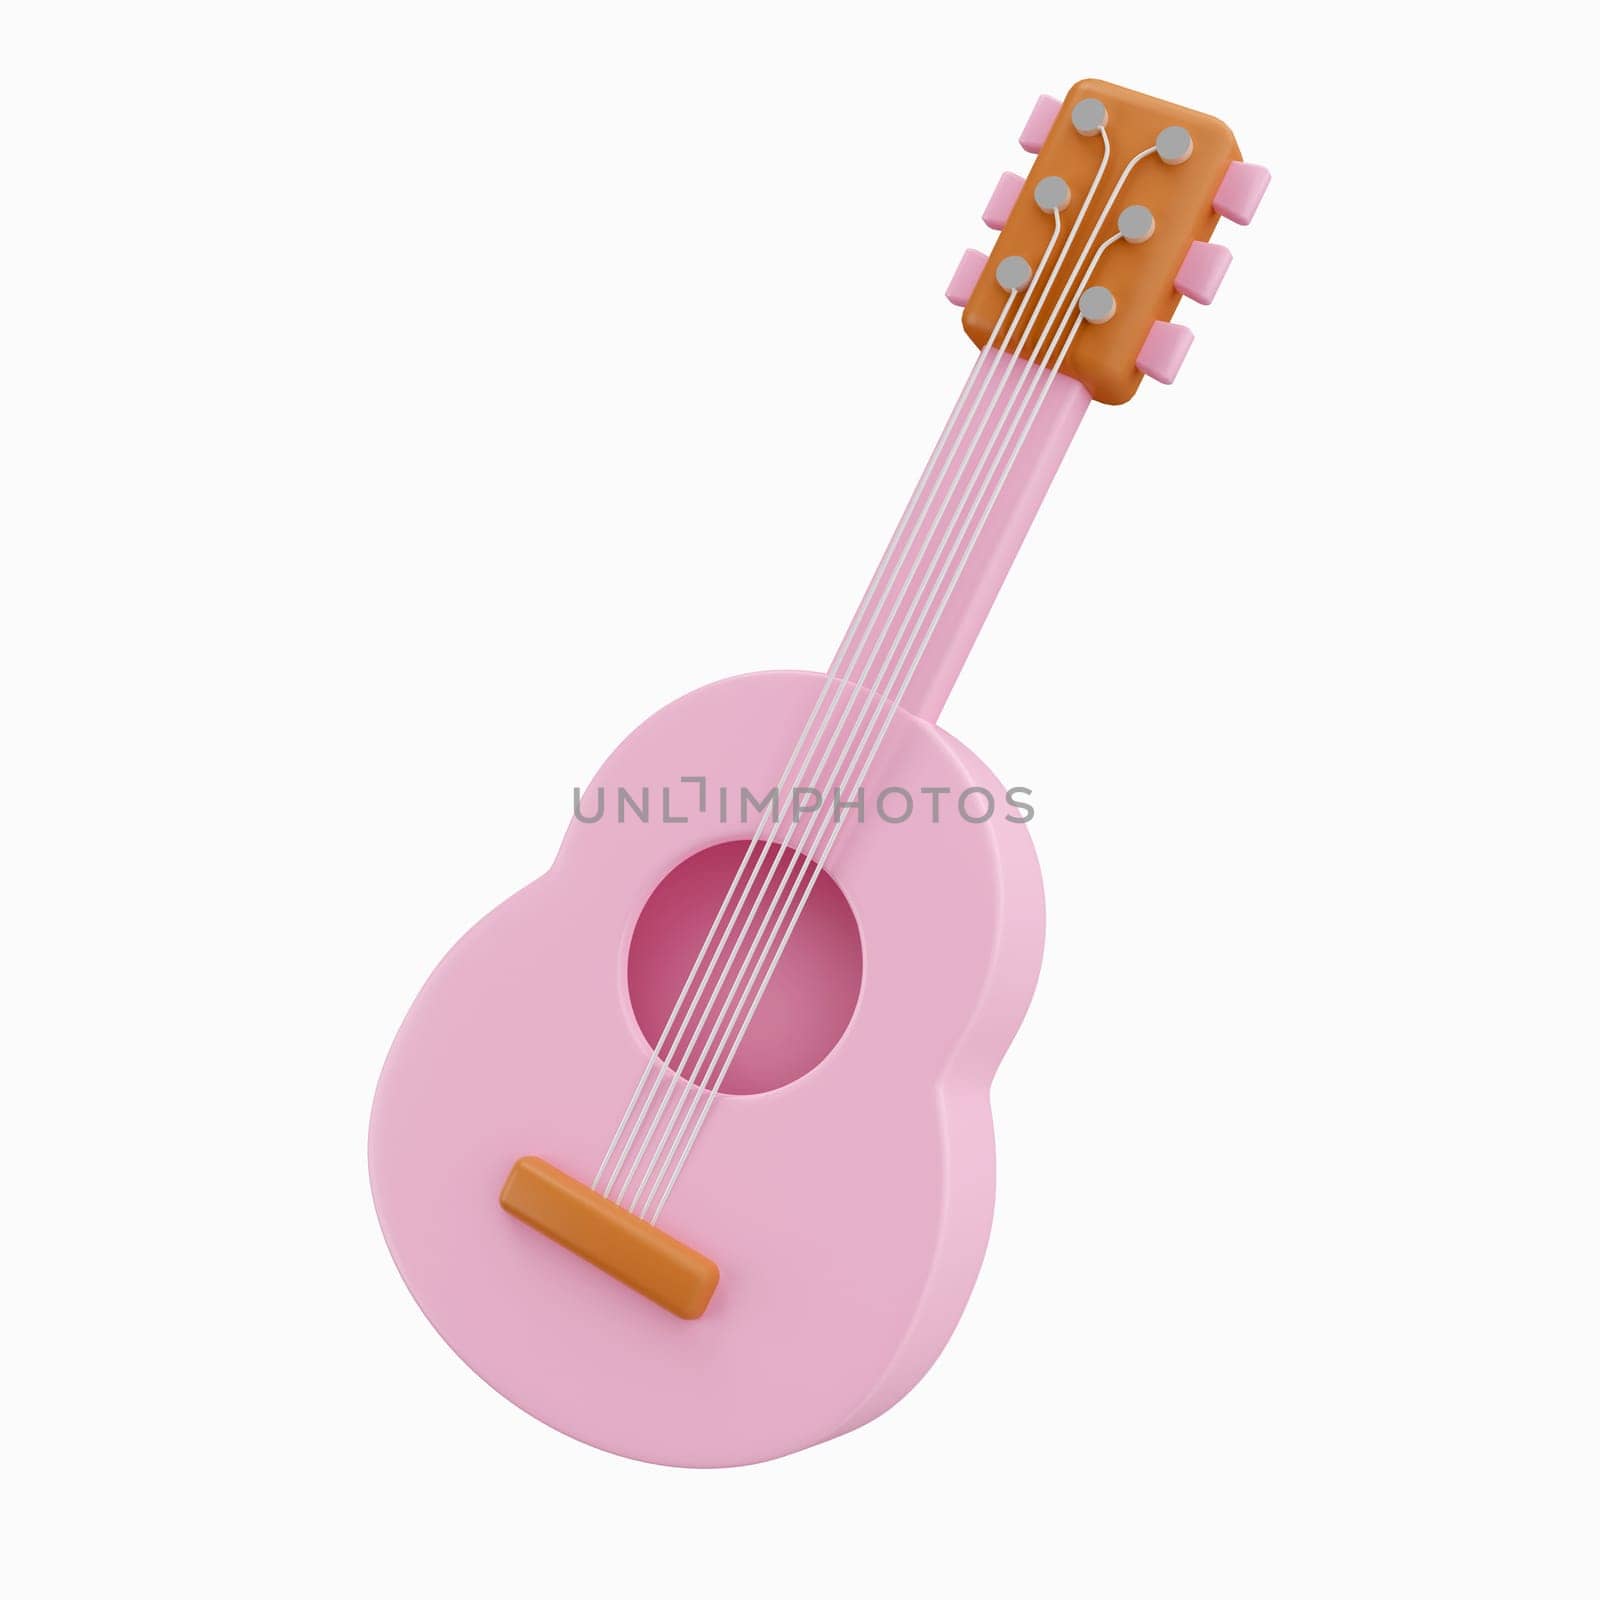 3d guitar. music class. Back to school and education concept. icon isolated on background, icon symbol clipping path. 3d render illustration.